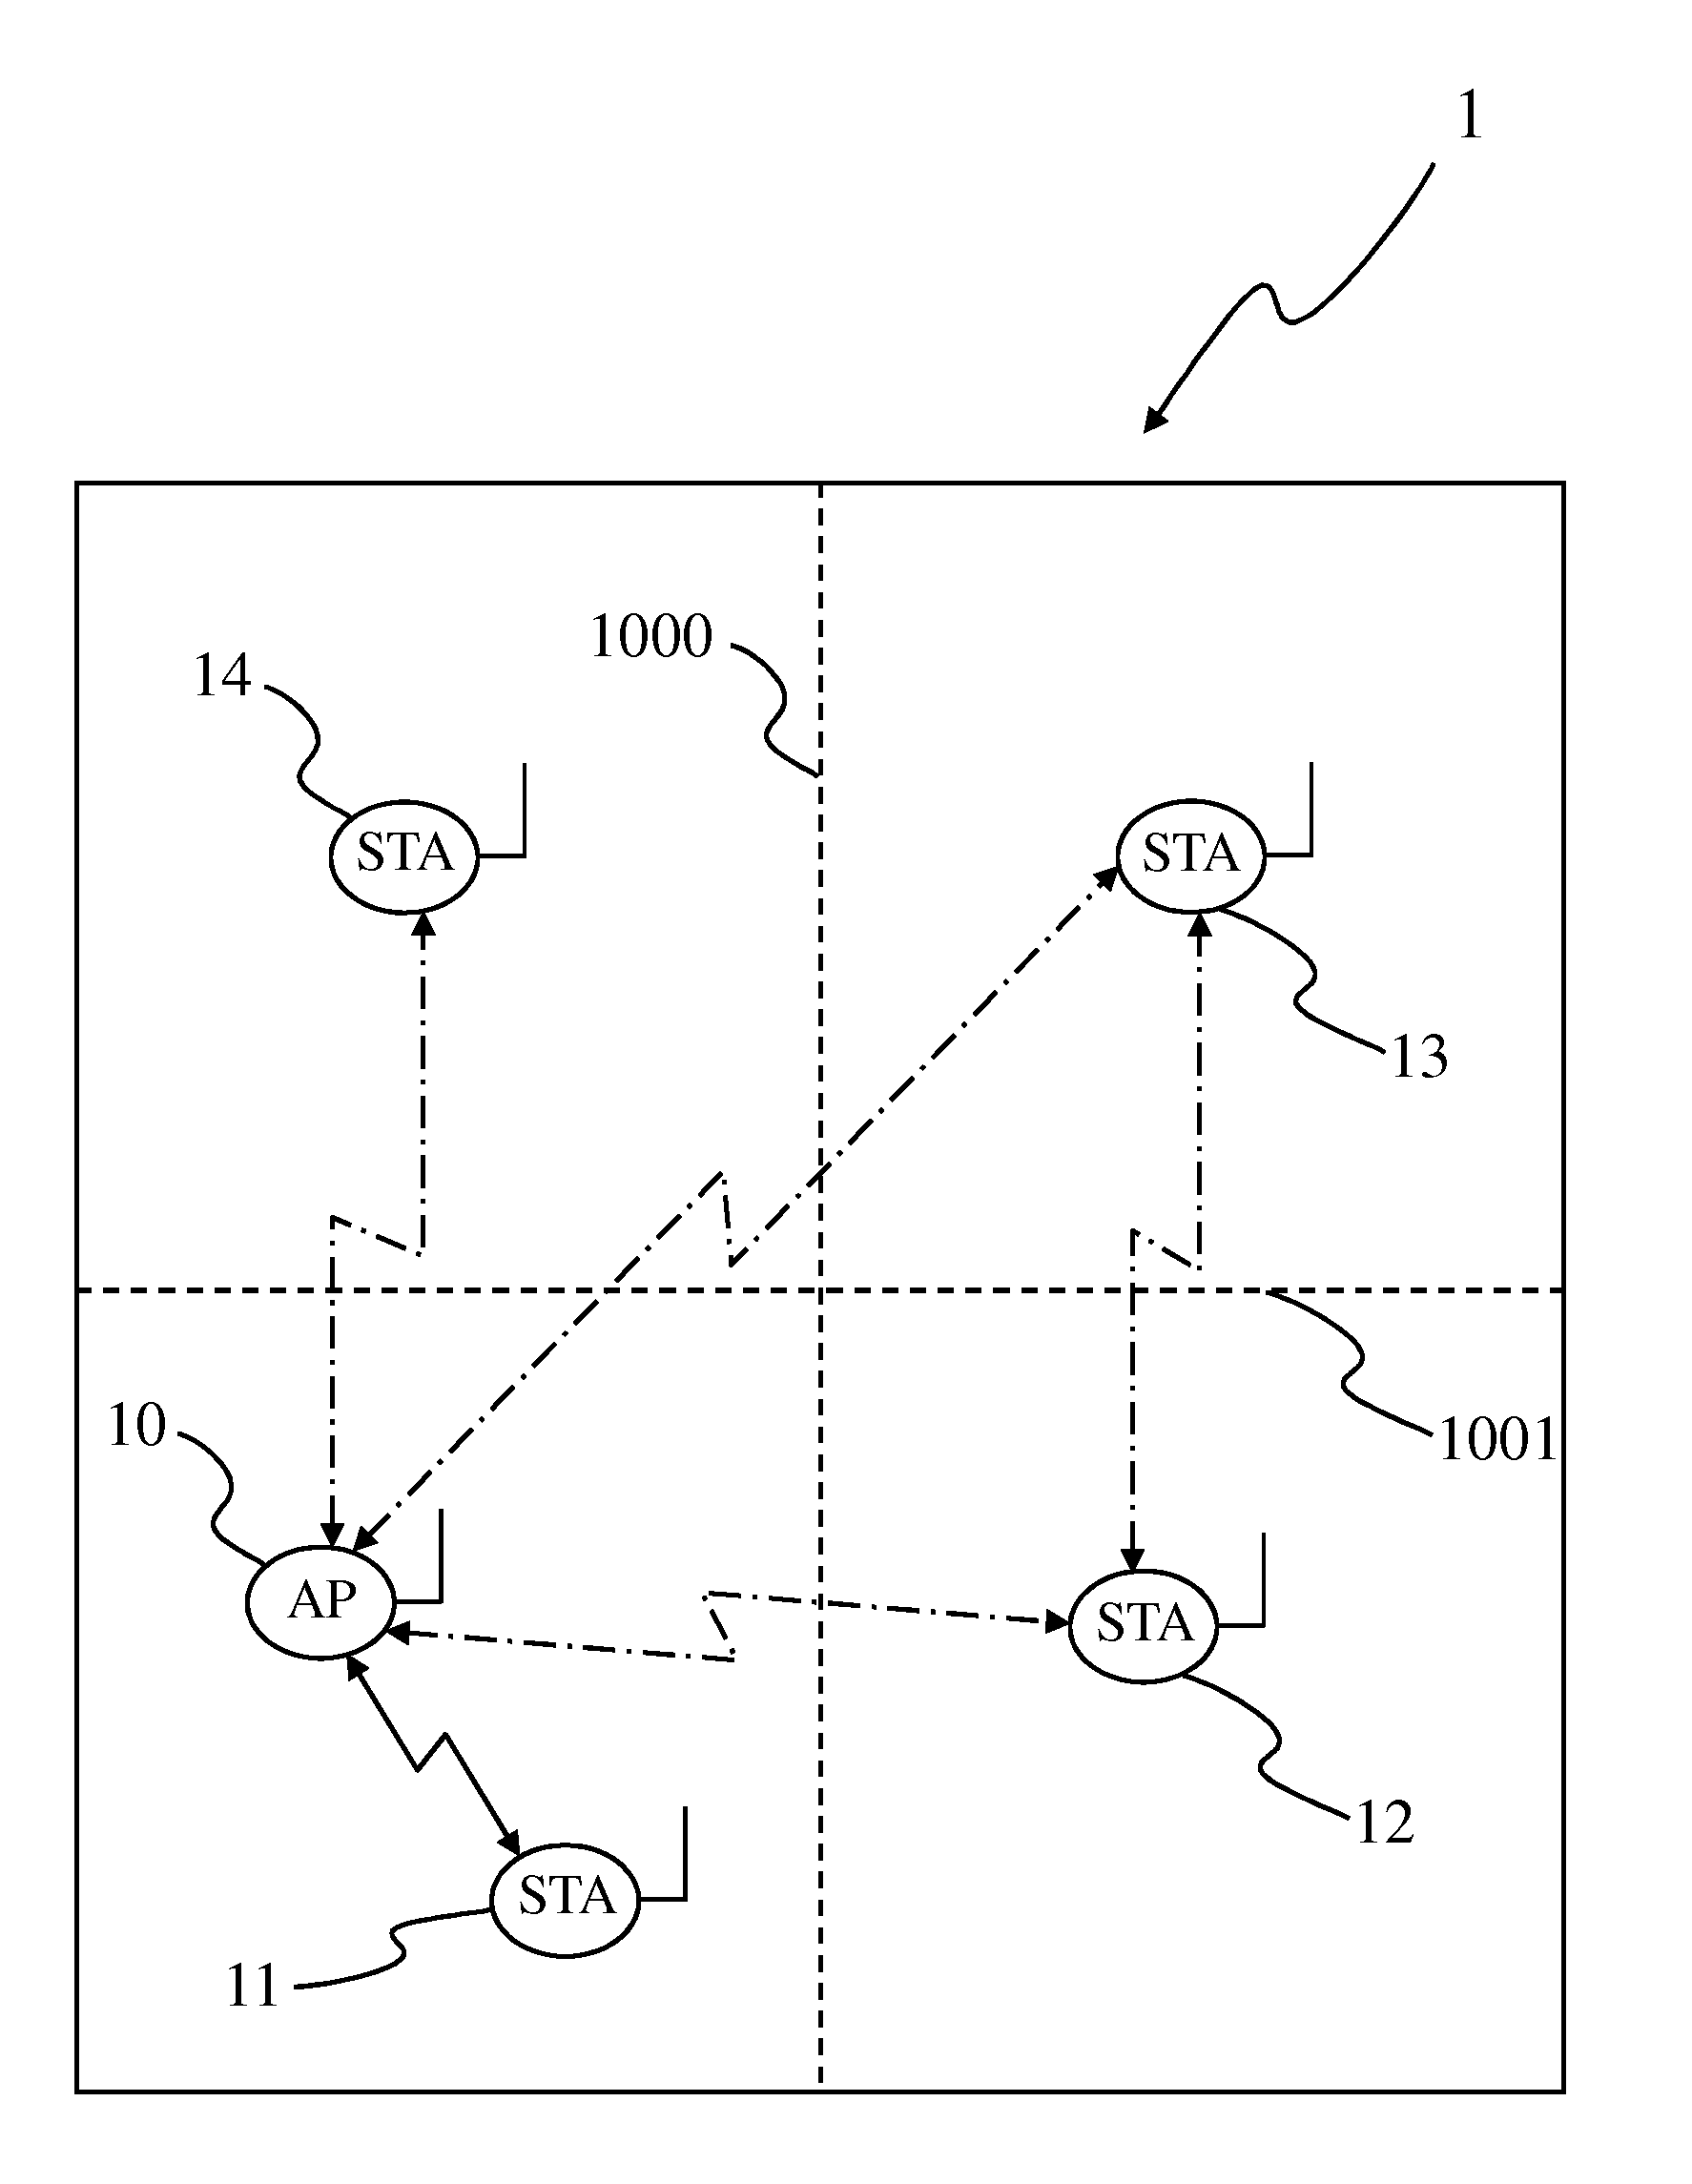 Contention for wireless access using two types of channels